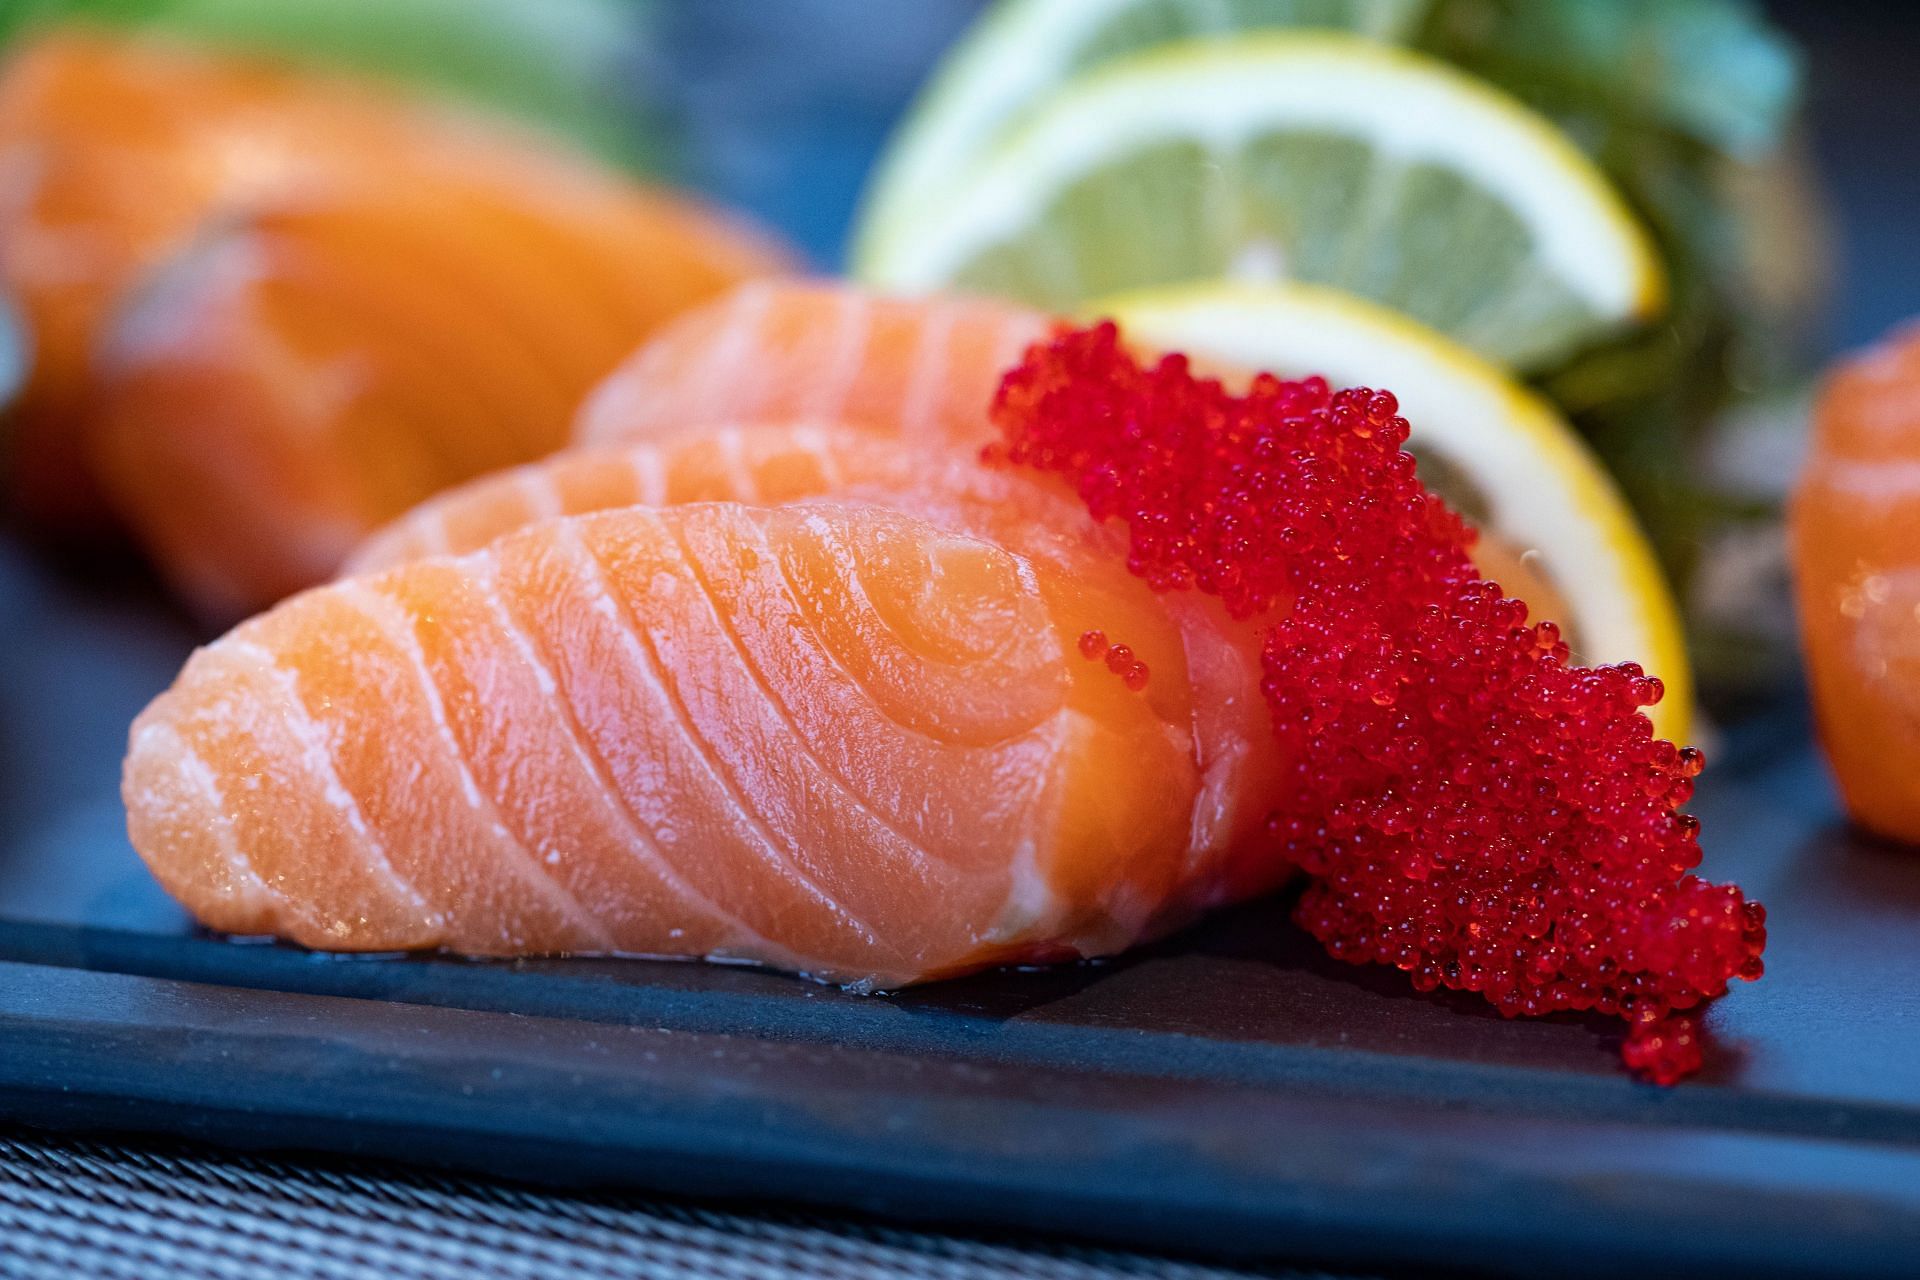 Salmon is a great food to add to your anti-inflammatory diet. (Image via pexels/Valeria Boltneva)